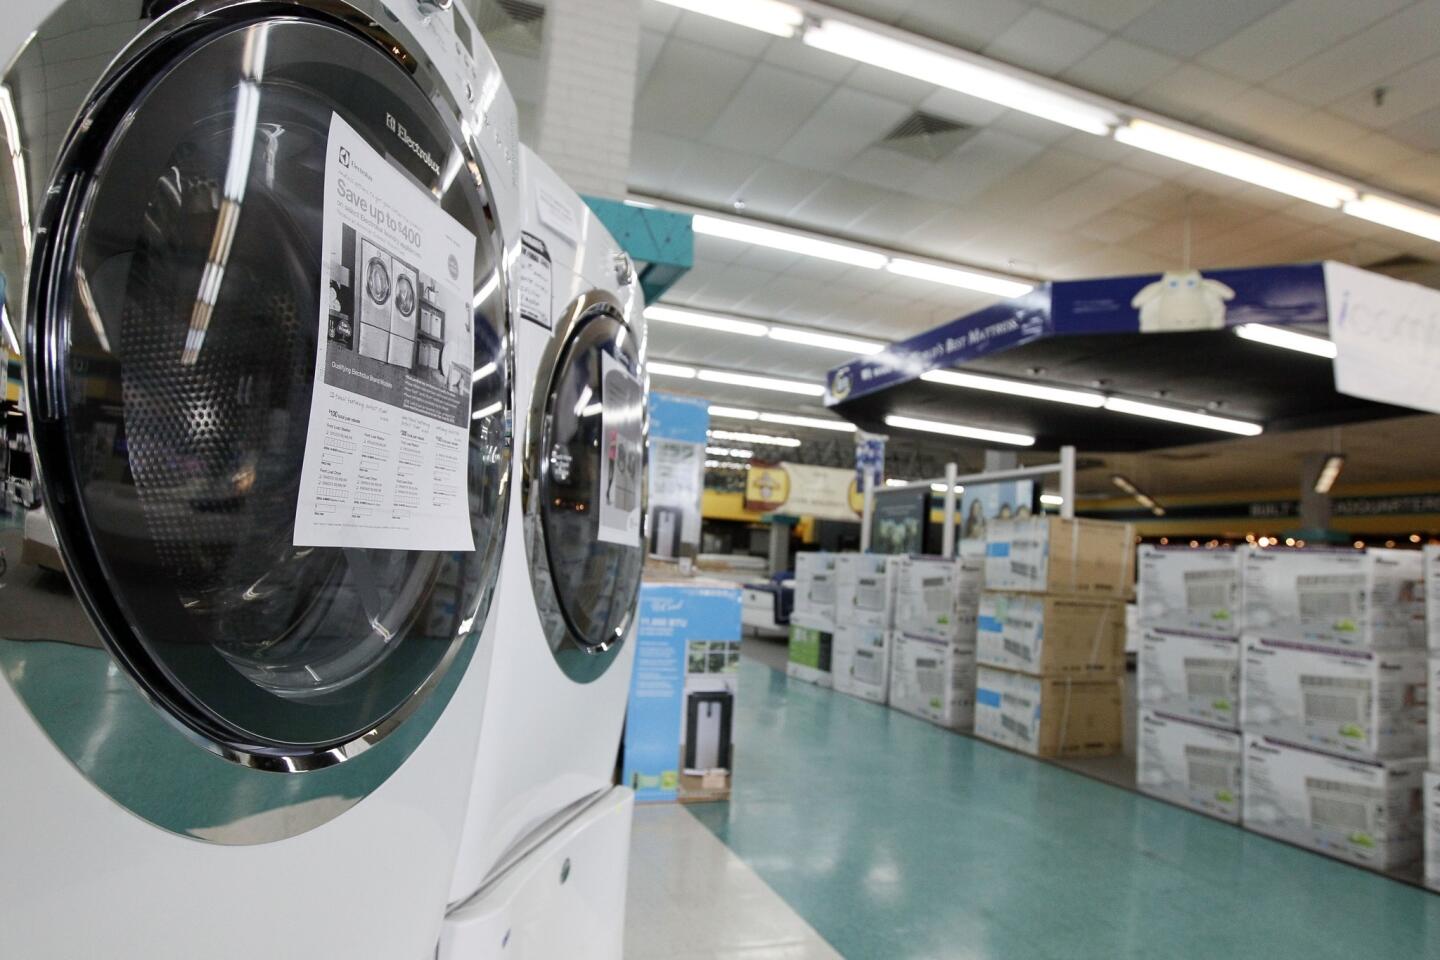 No. 6: Major household appliance manufacturing